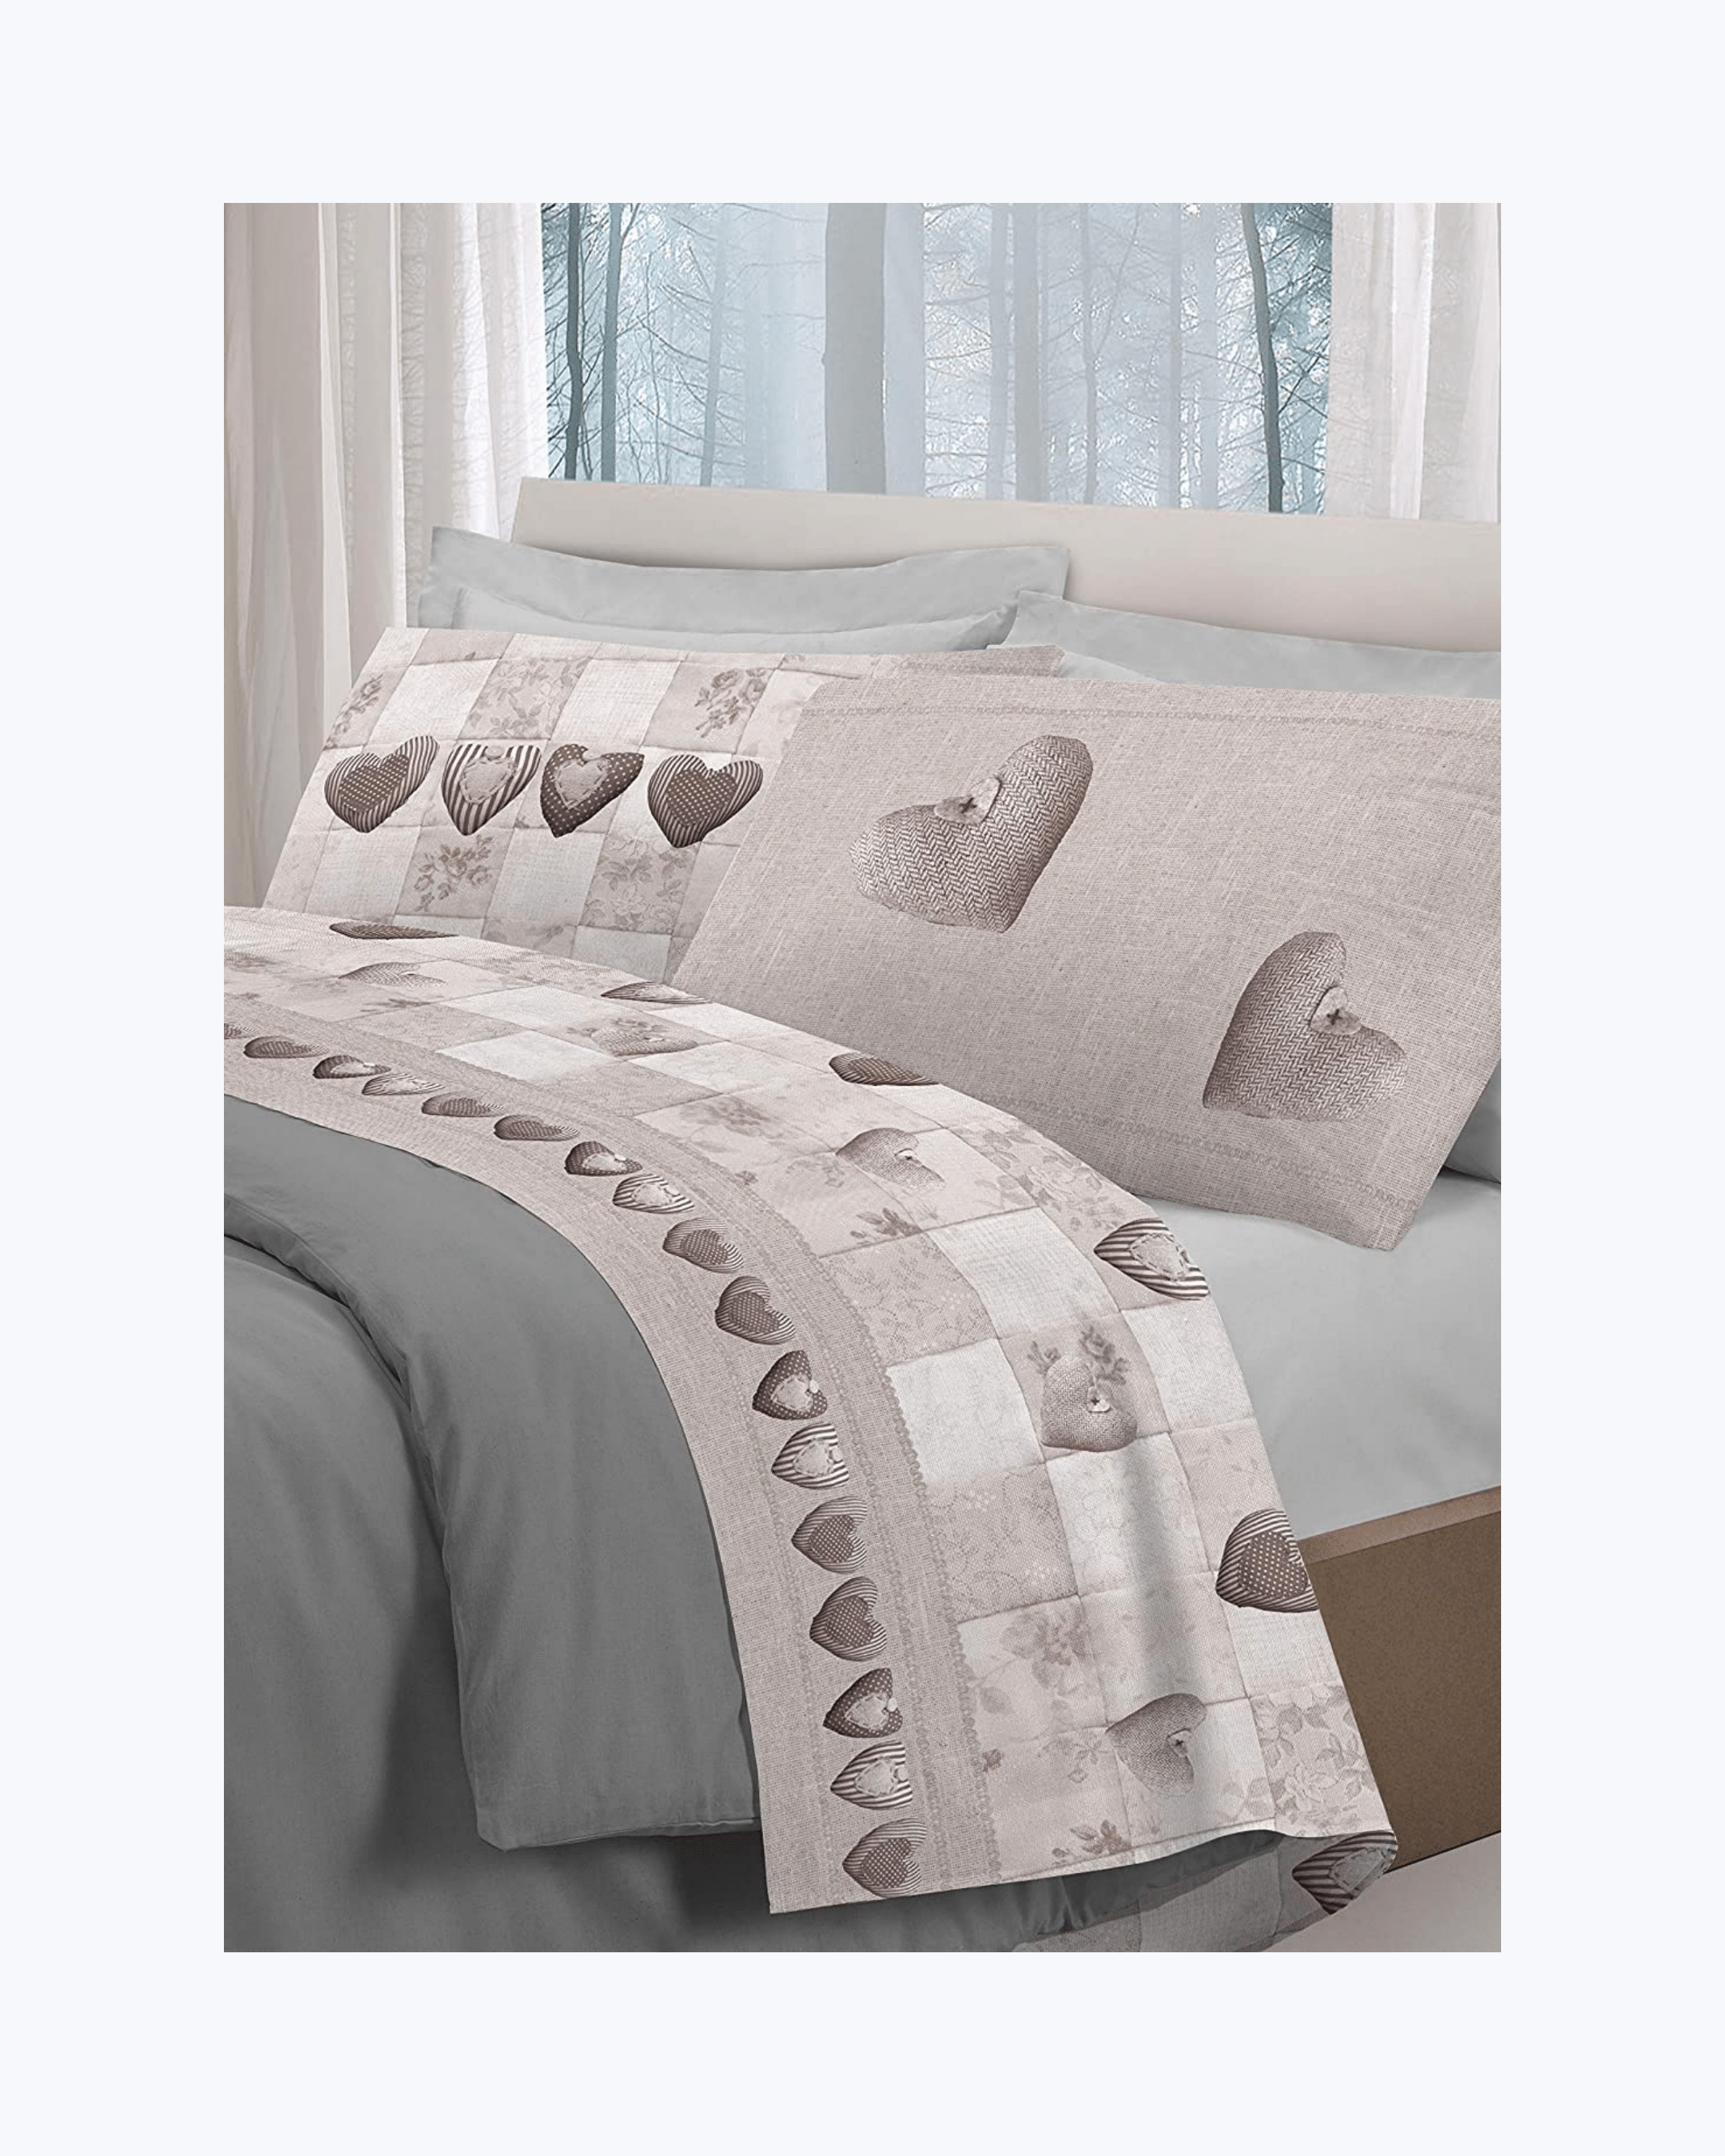 Set Lenzuola Letto in Cotone Made in Italy - Completo Letto Stampa Patchwork Beige